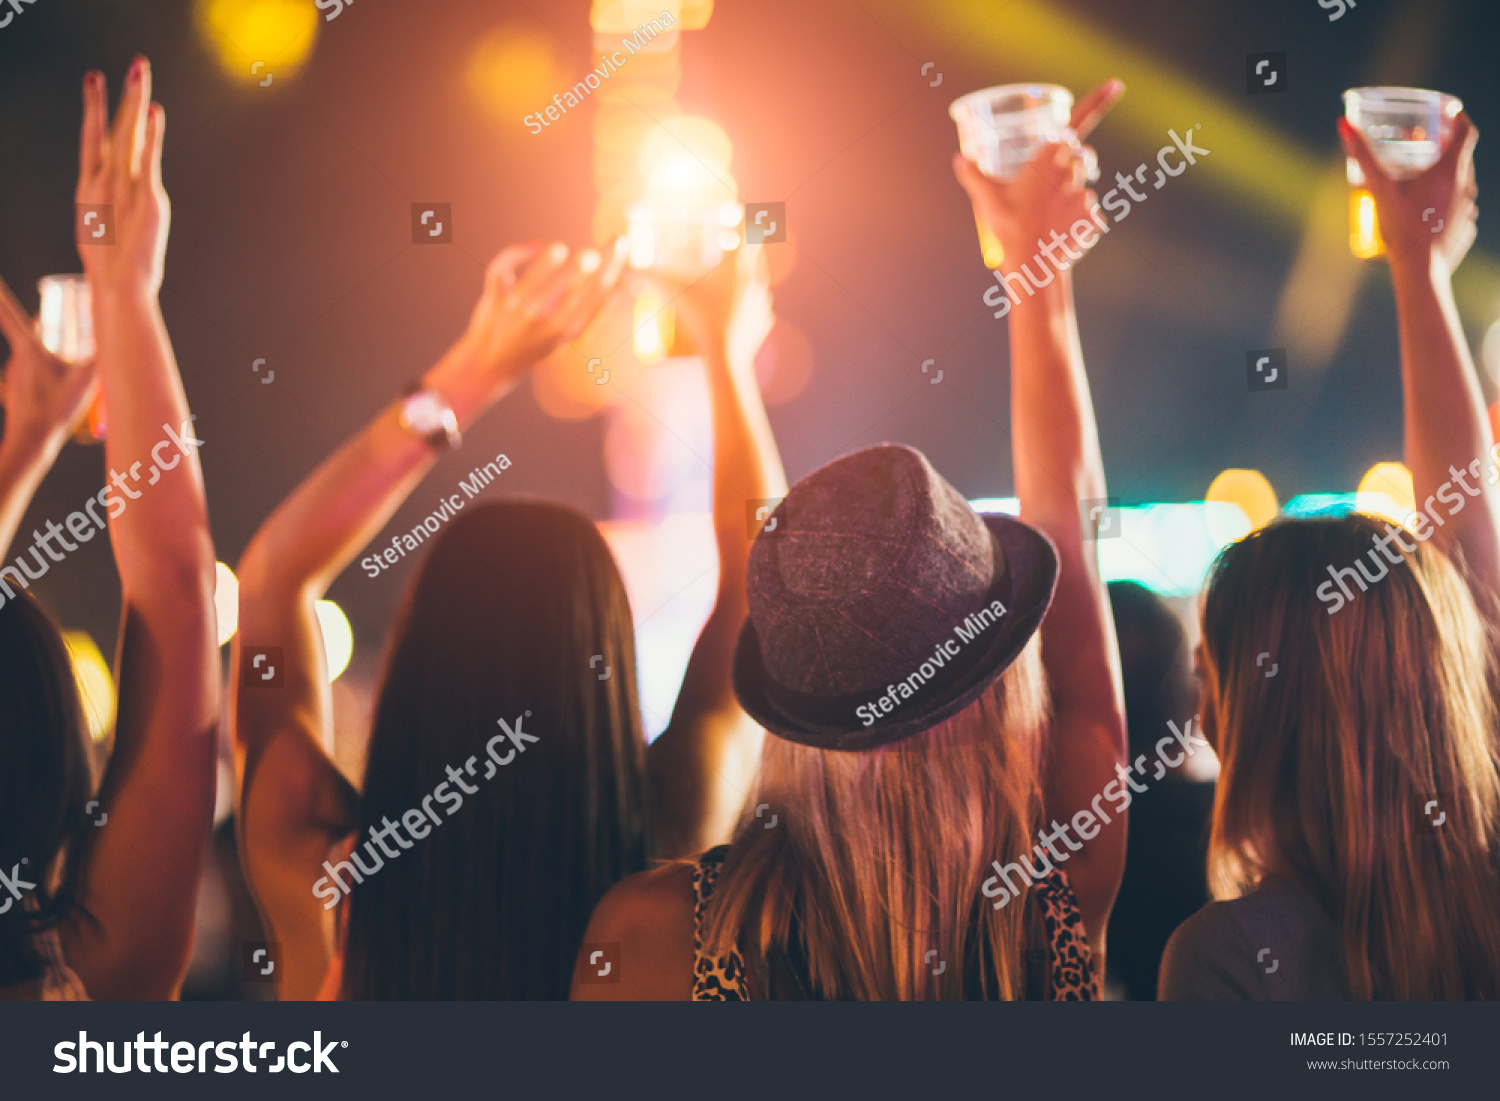 Back view of female friends drinking beer and dancing at music festival #1557252401